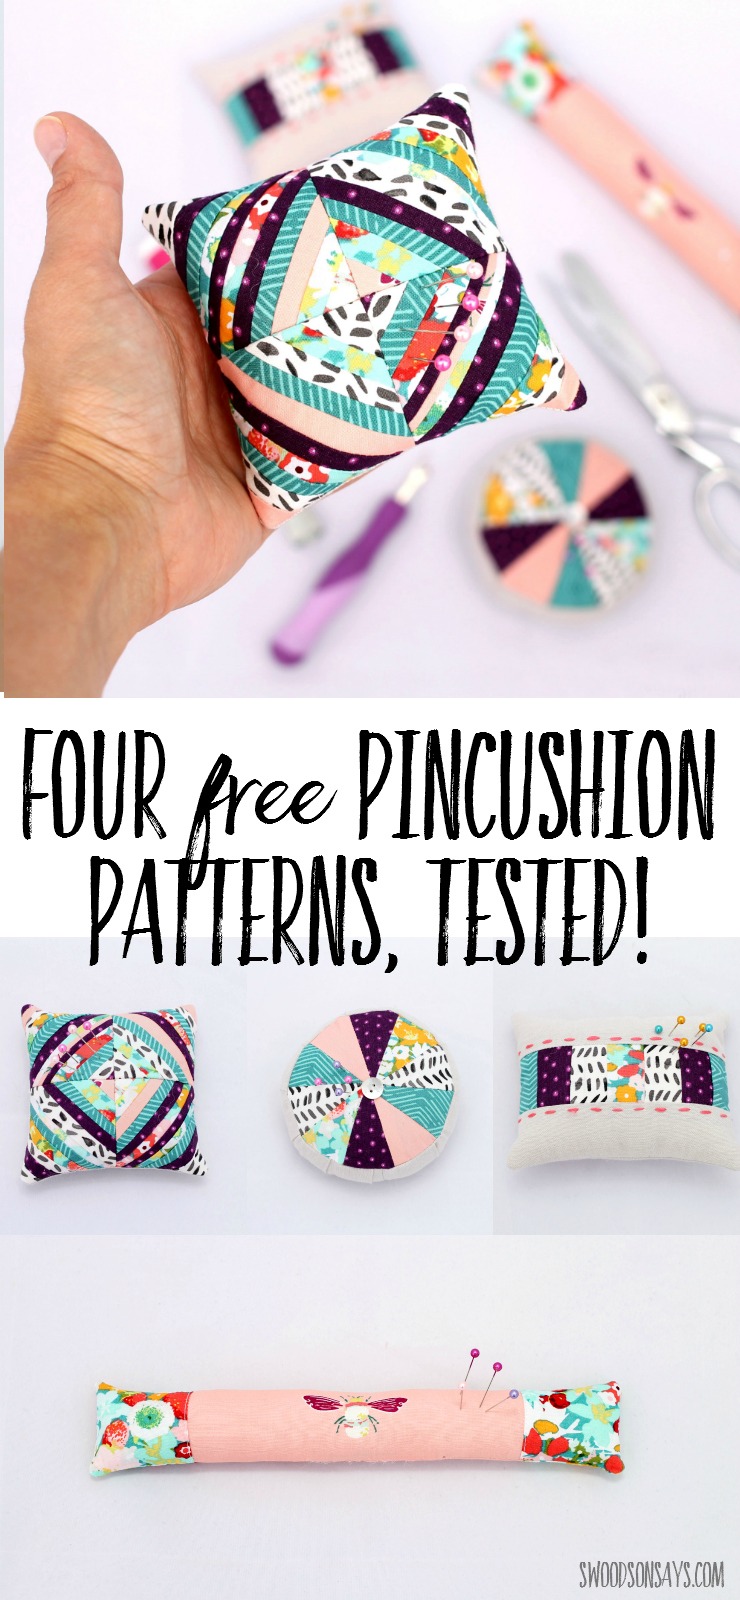 I tested four free pincushion patterns - come see what I thought of each one and get the links! Great scrap buster pincushion tutorials and handmade gift ideas.